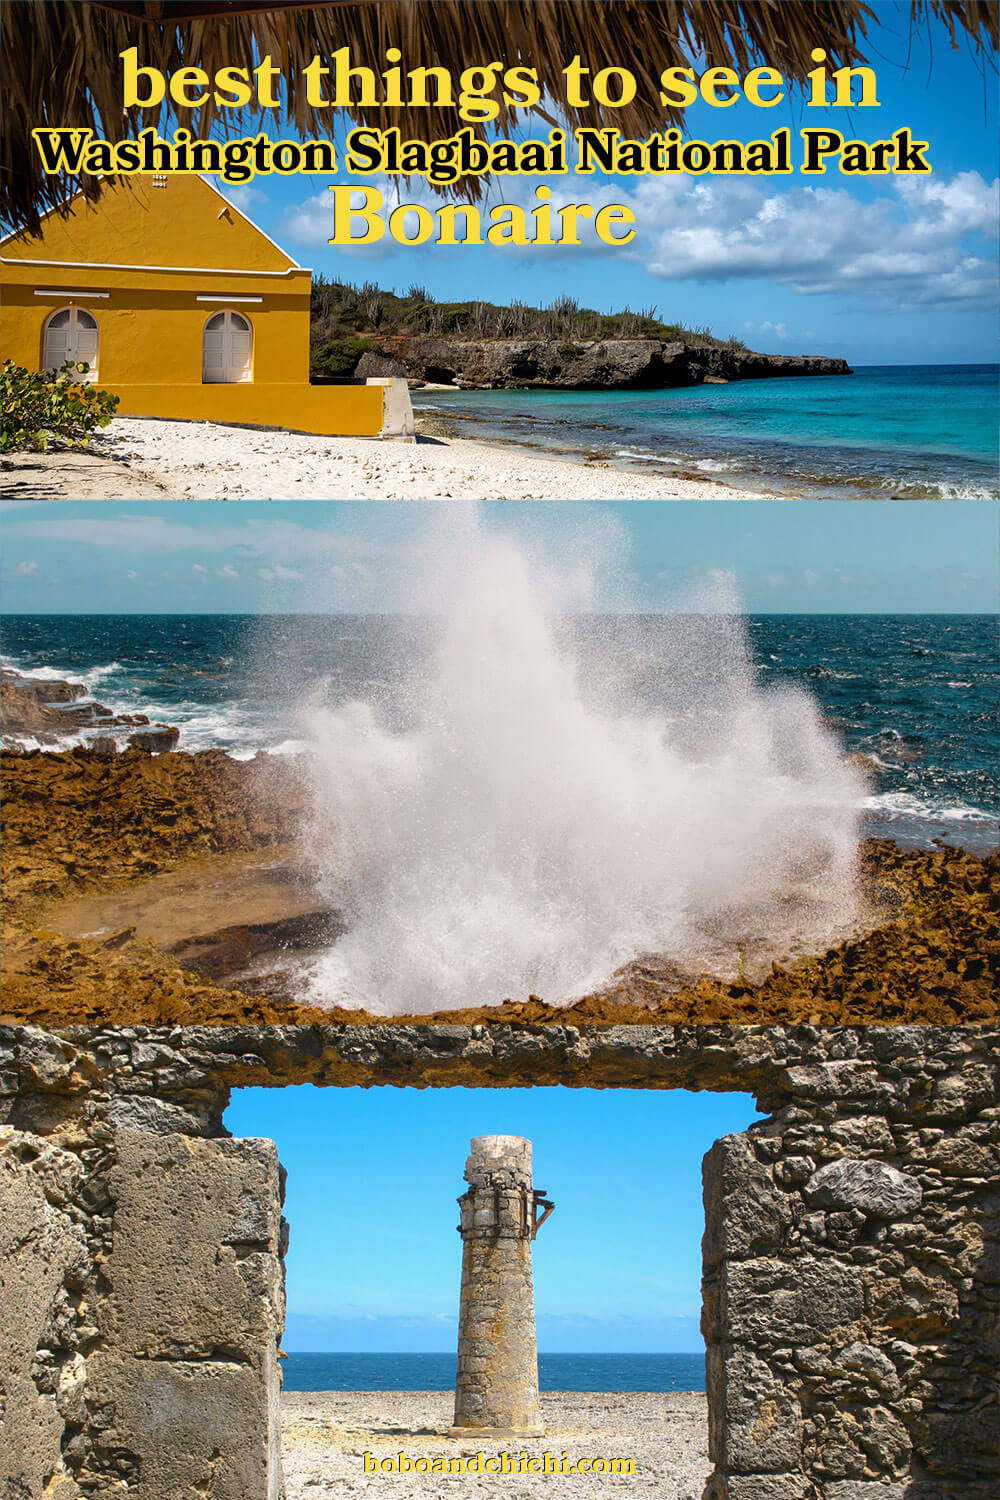 washington-slagbaai-national-park-guide-to-what-to-see-and-do-in-bonaire